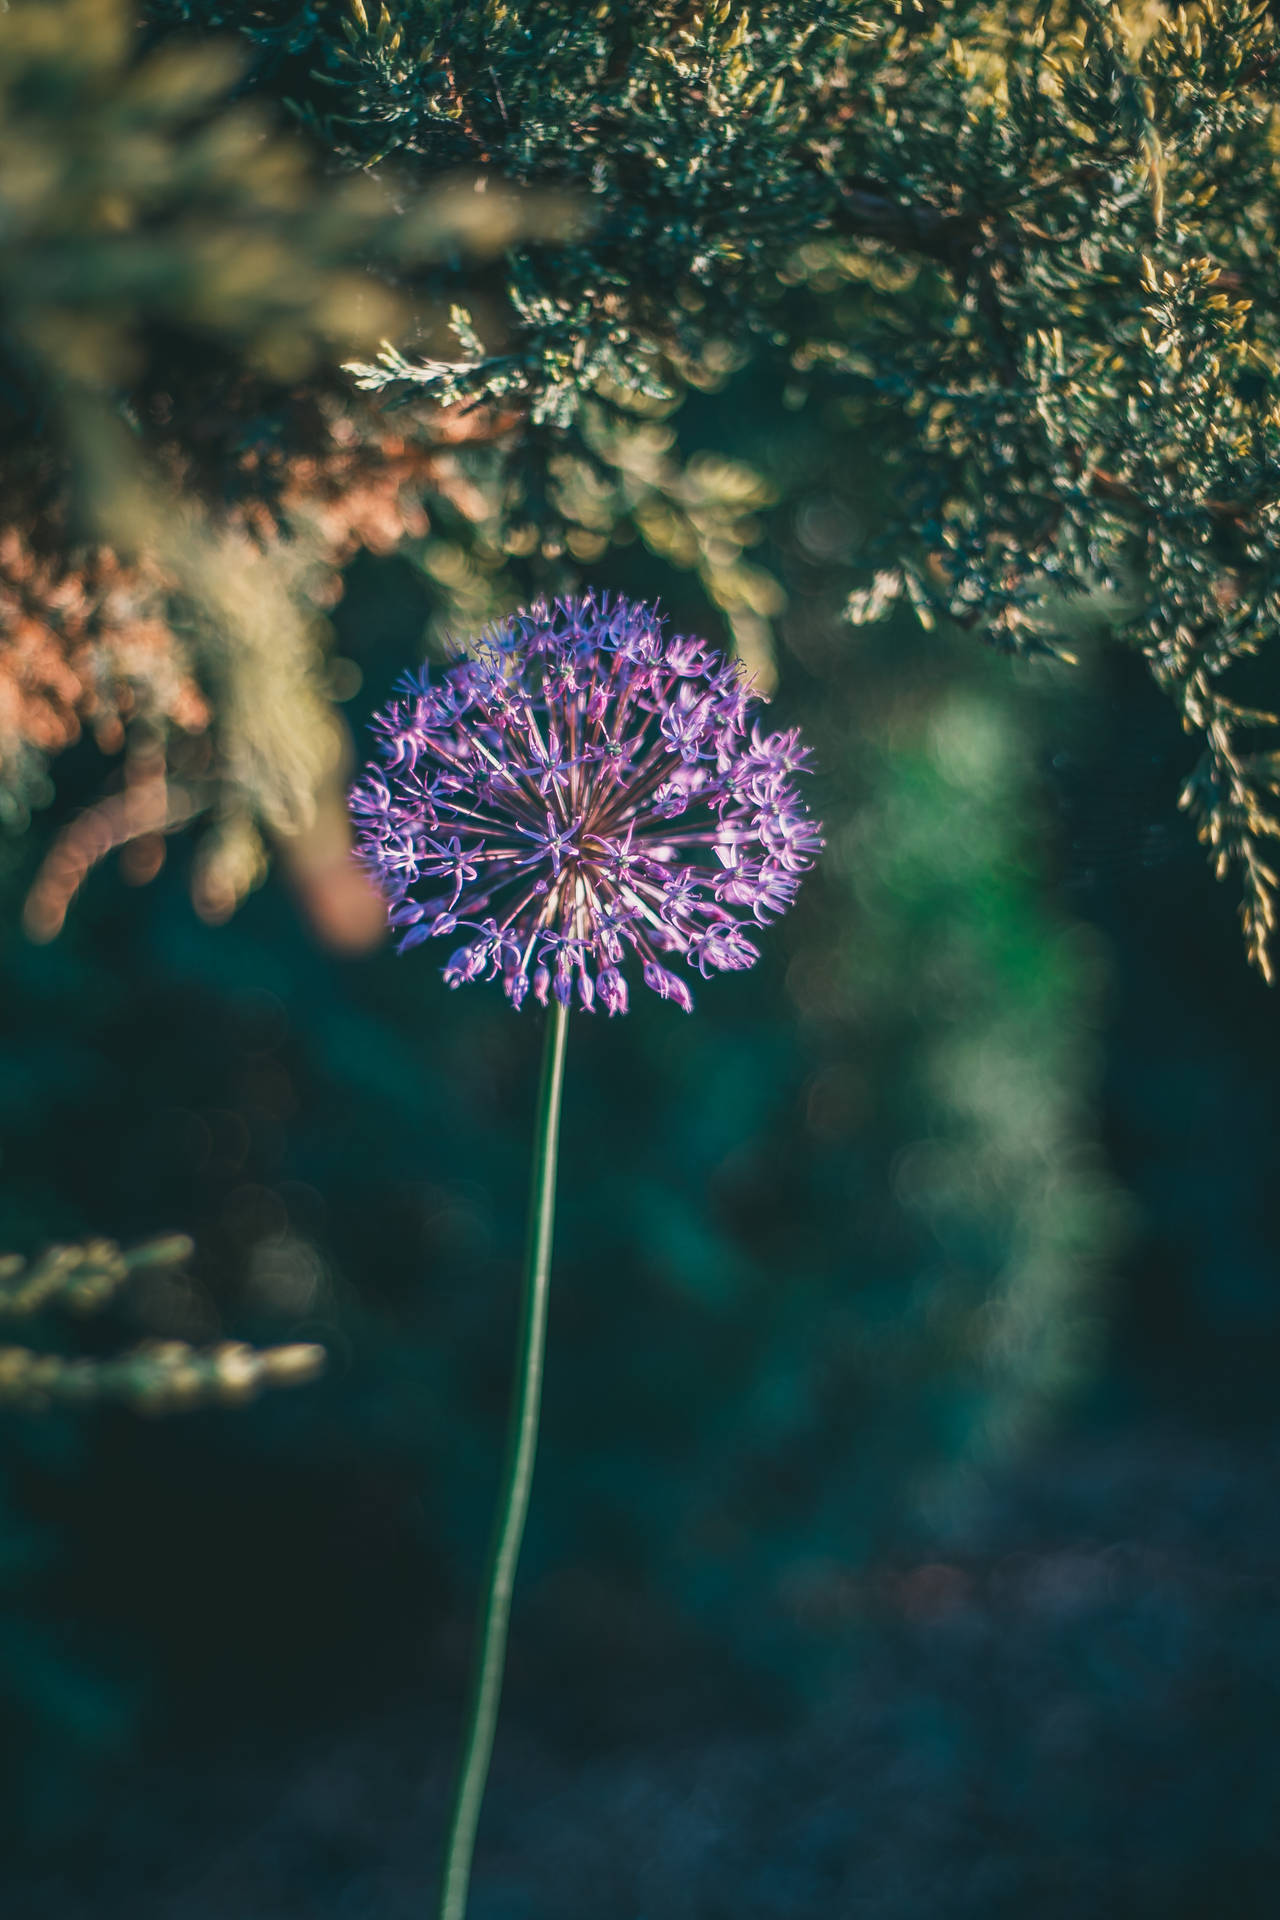 A close-up of a single purple dandelion against an out-of-focus background Wallpaper